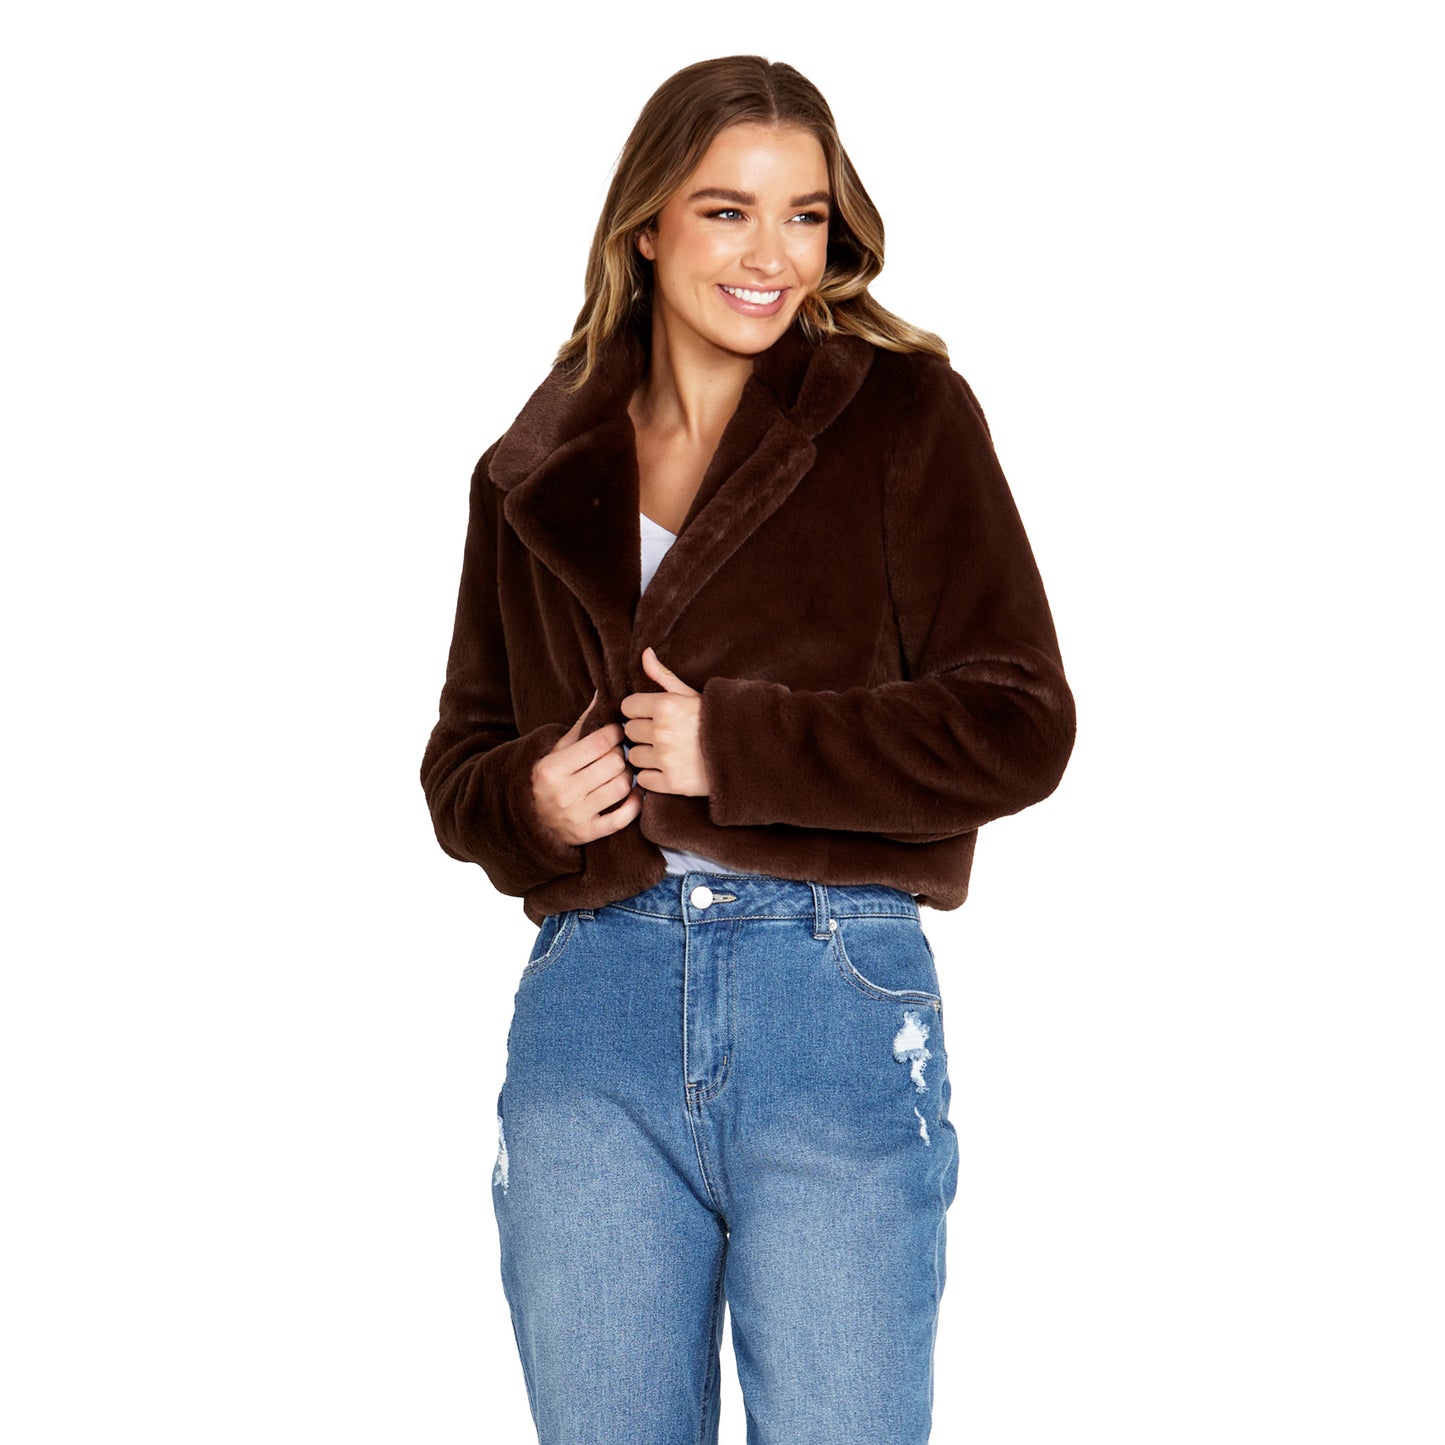 Xanthe Cropped Faux Fur Jacket - Chocolate Brown